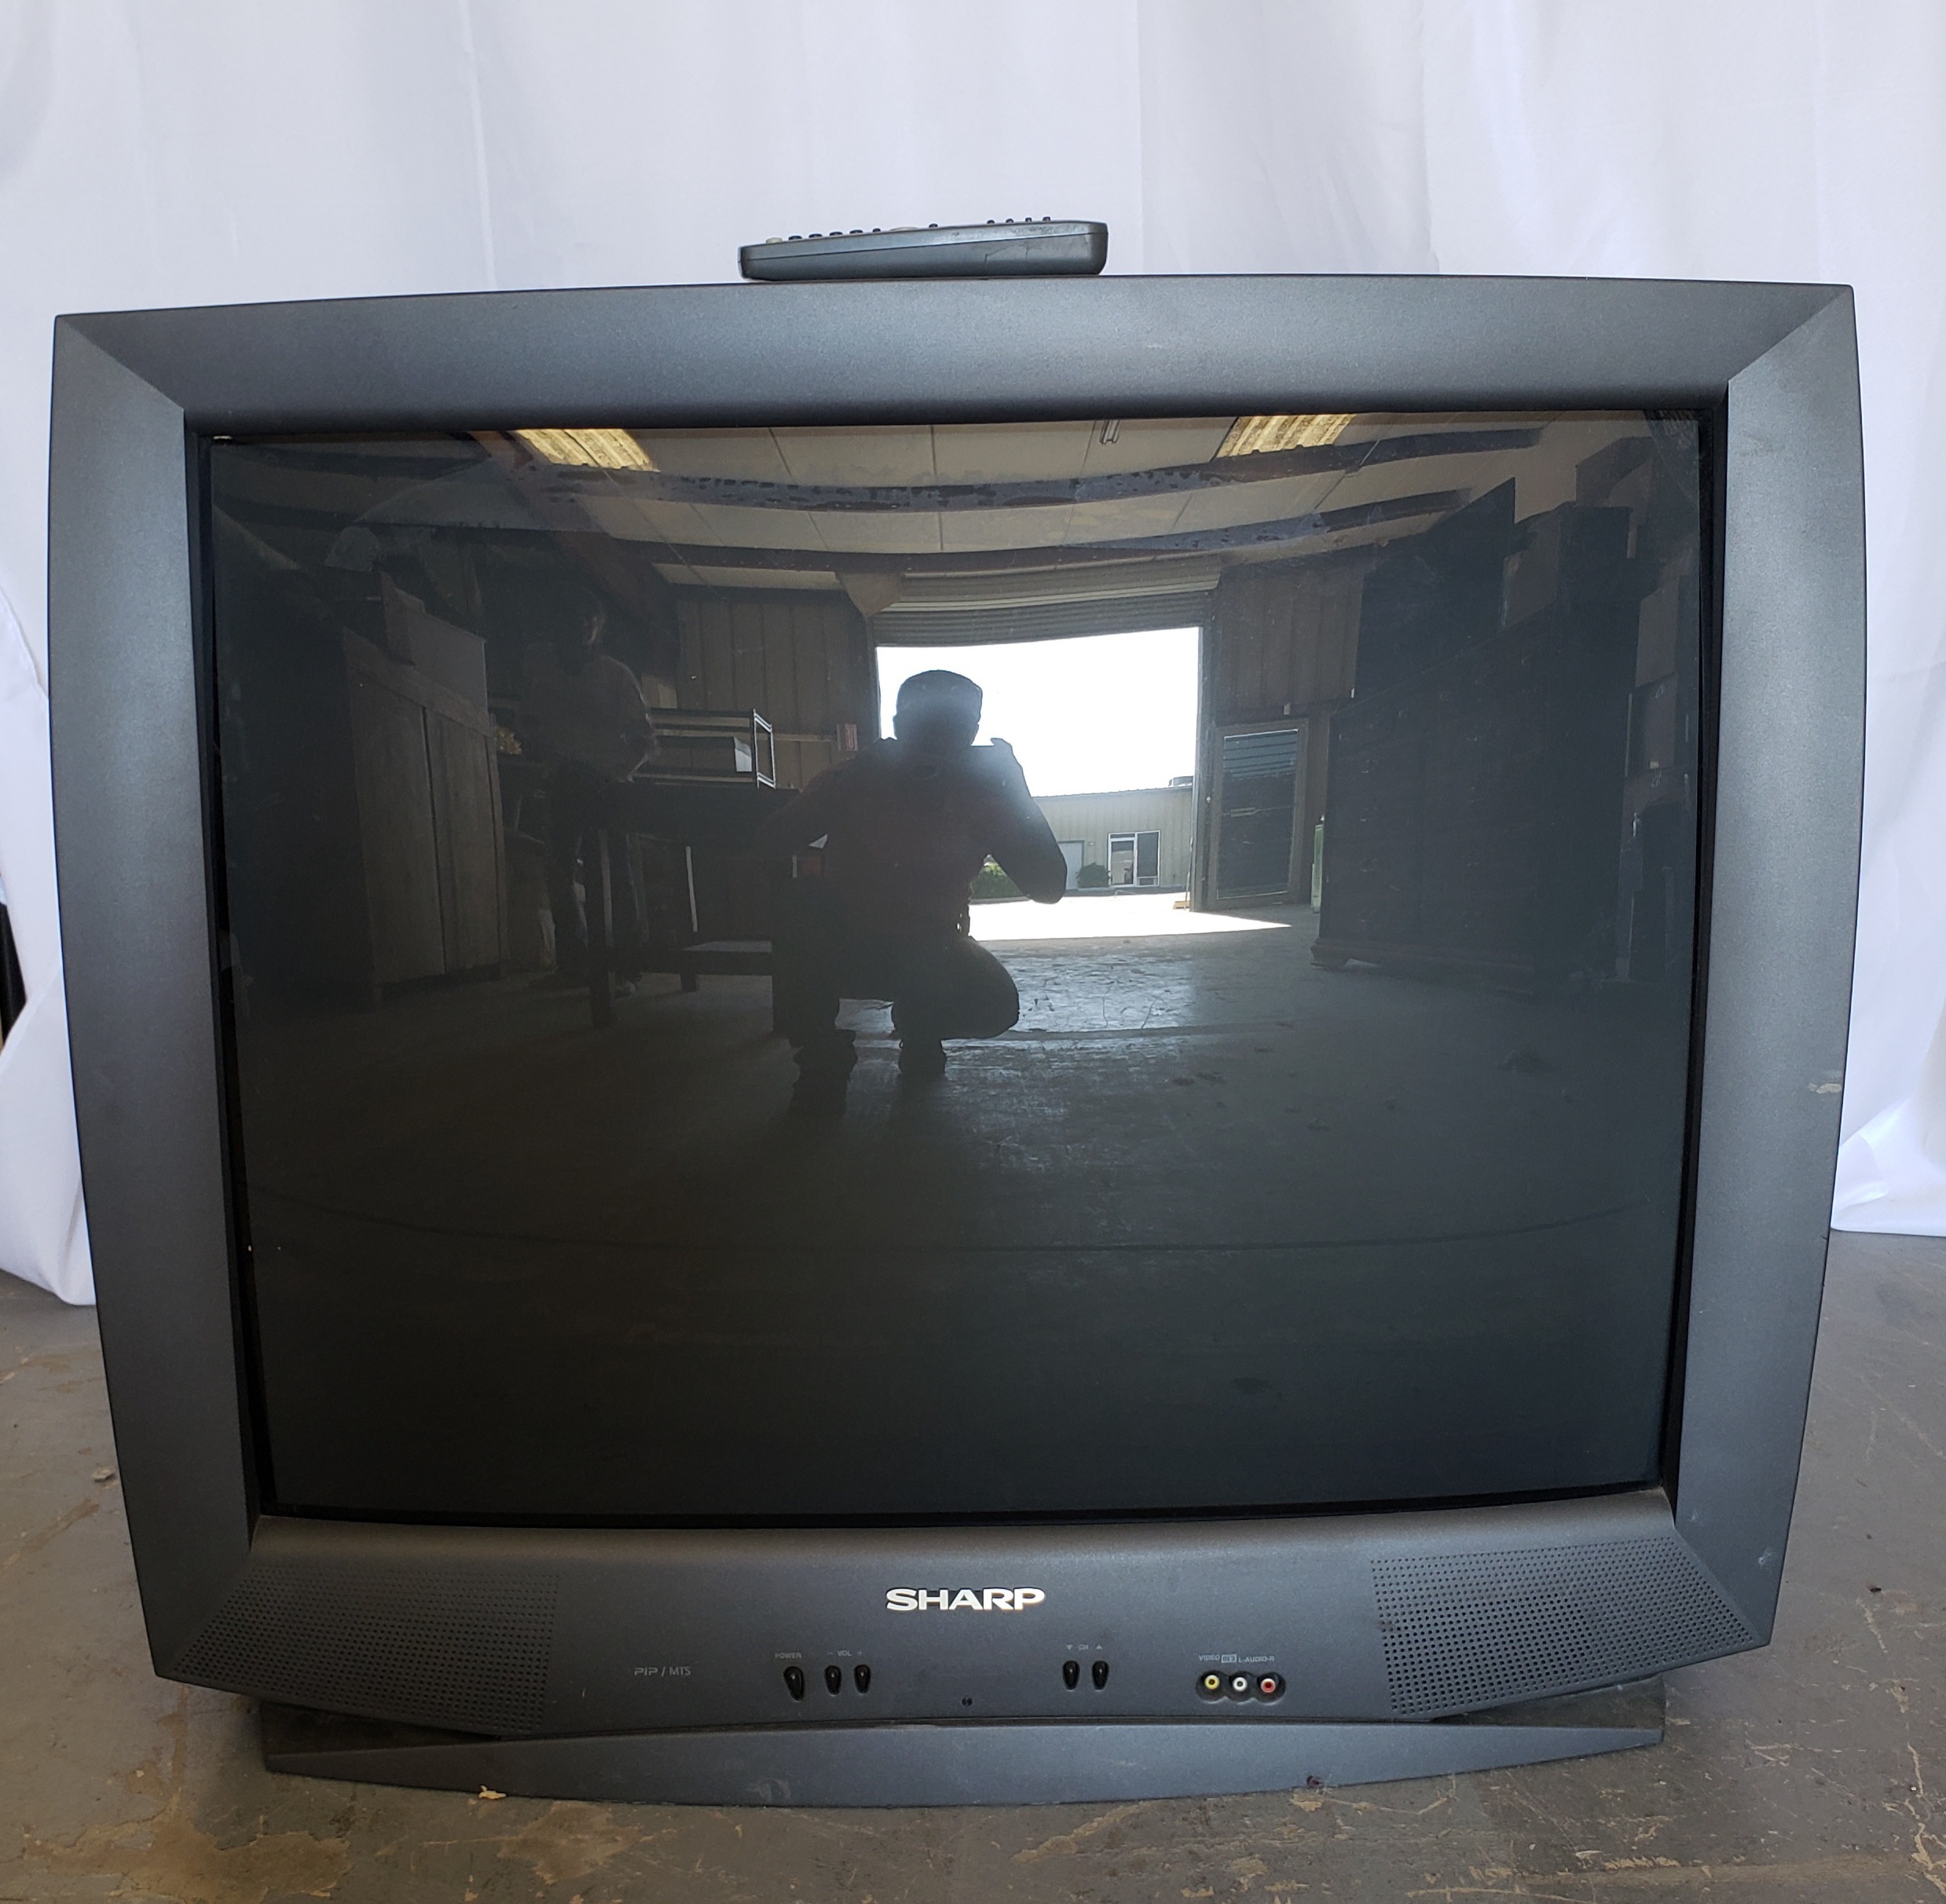 TV - Sharp 36" with Remote